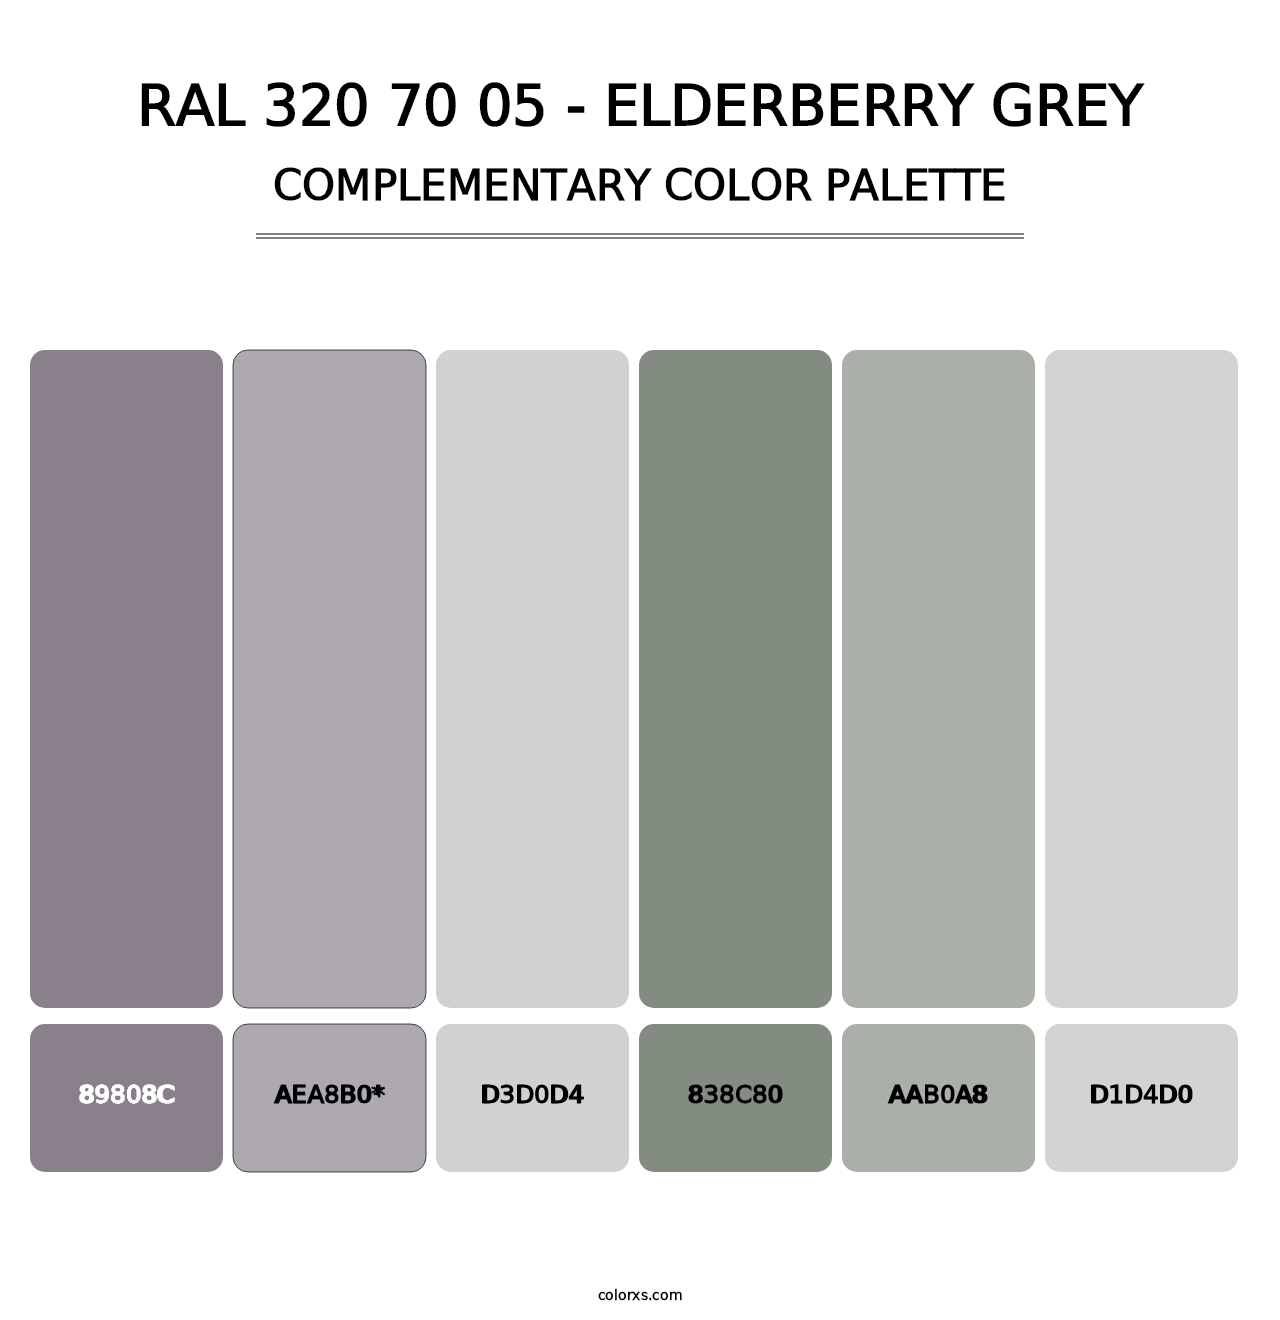 RAL 320 70 05 - Elderberry Grey - Complementary Color Palette